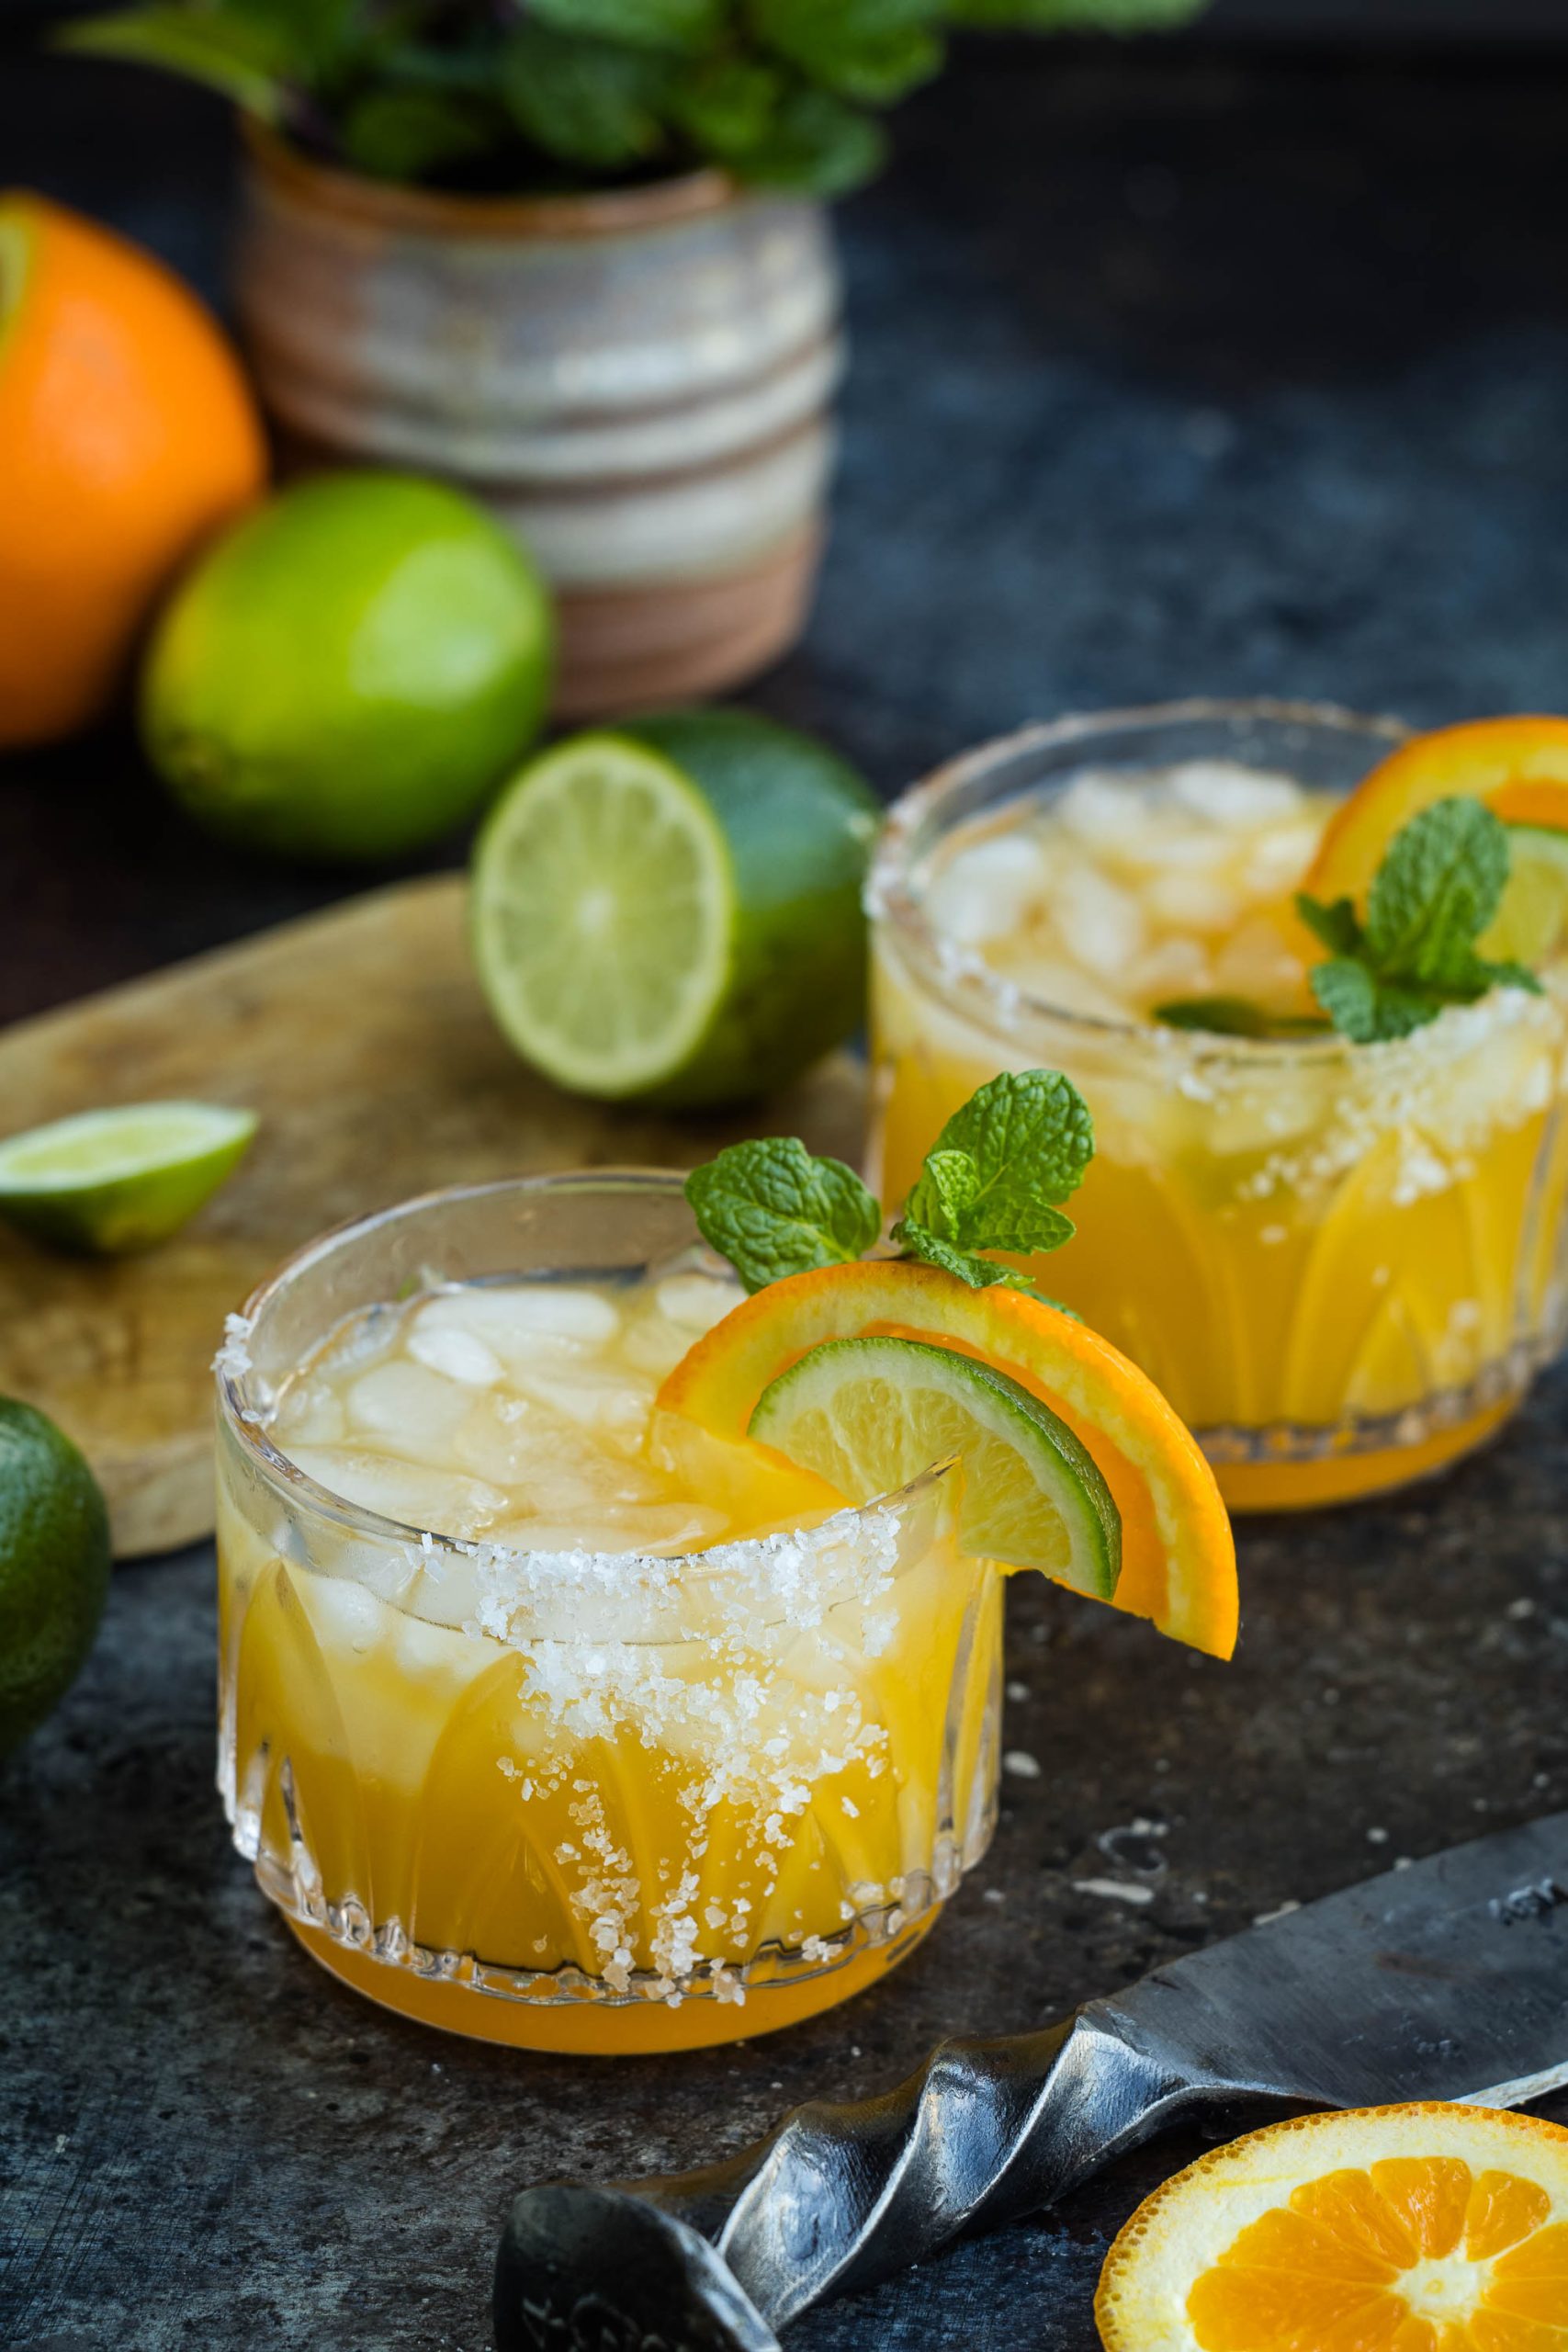 Two glasses of Italian Amaretto Margarita  garnished with lime, orange slices, and mint leaves, with a rustic background.